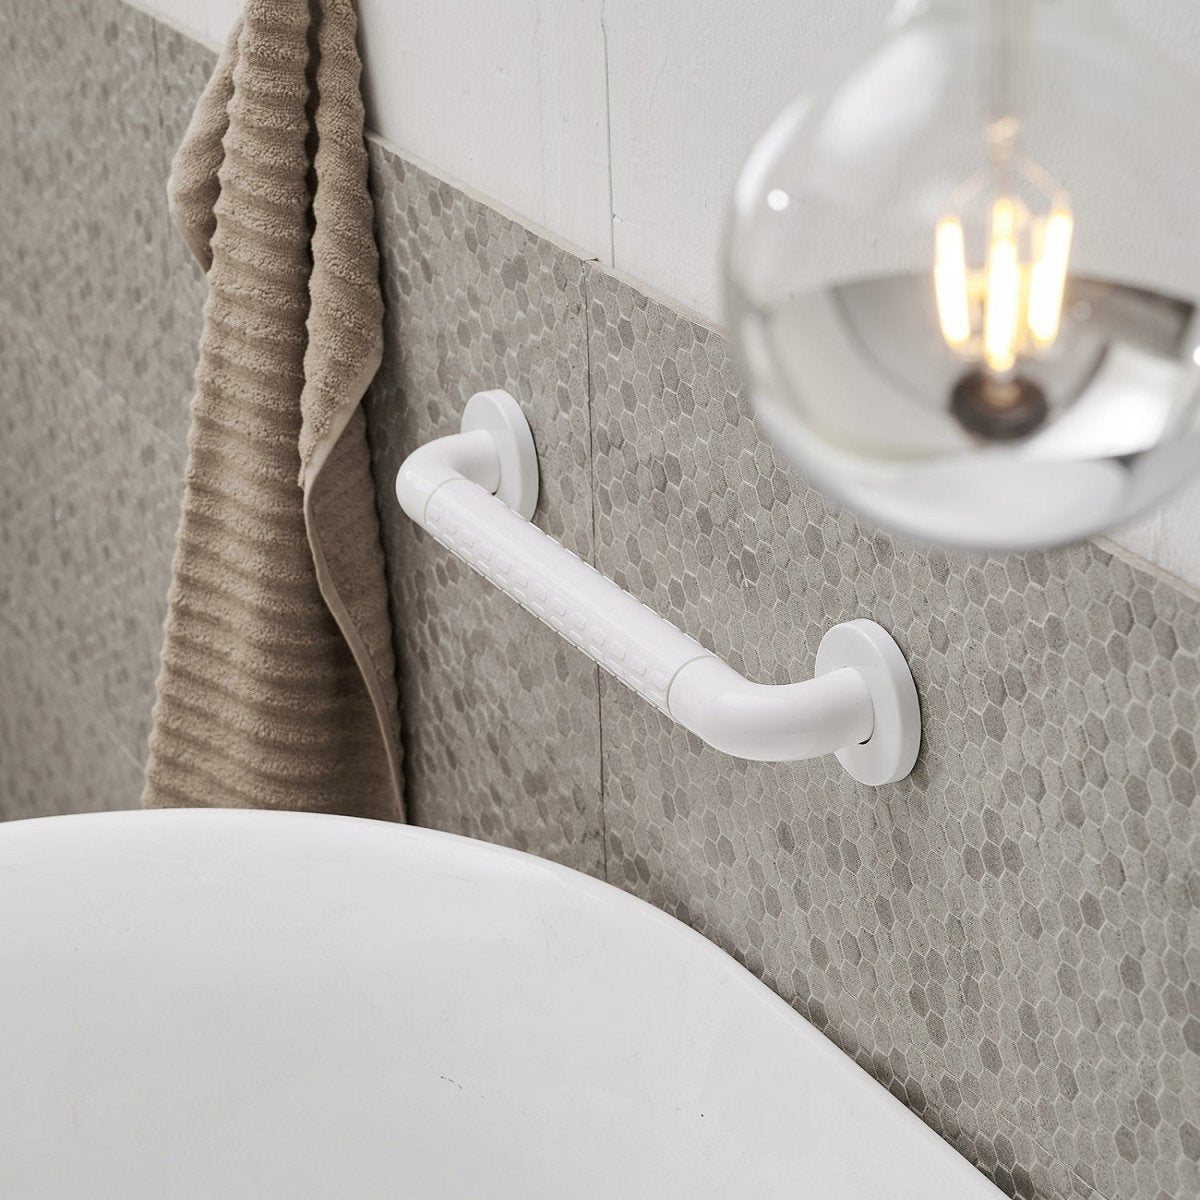 Concealed Screw Grab Bar with Secure Mount in White 17.91" - buyfaucet.com